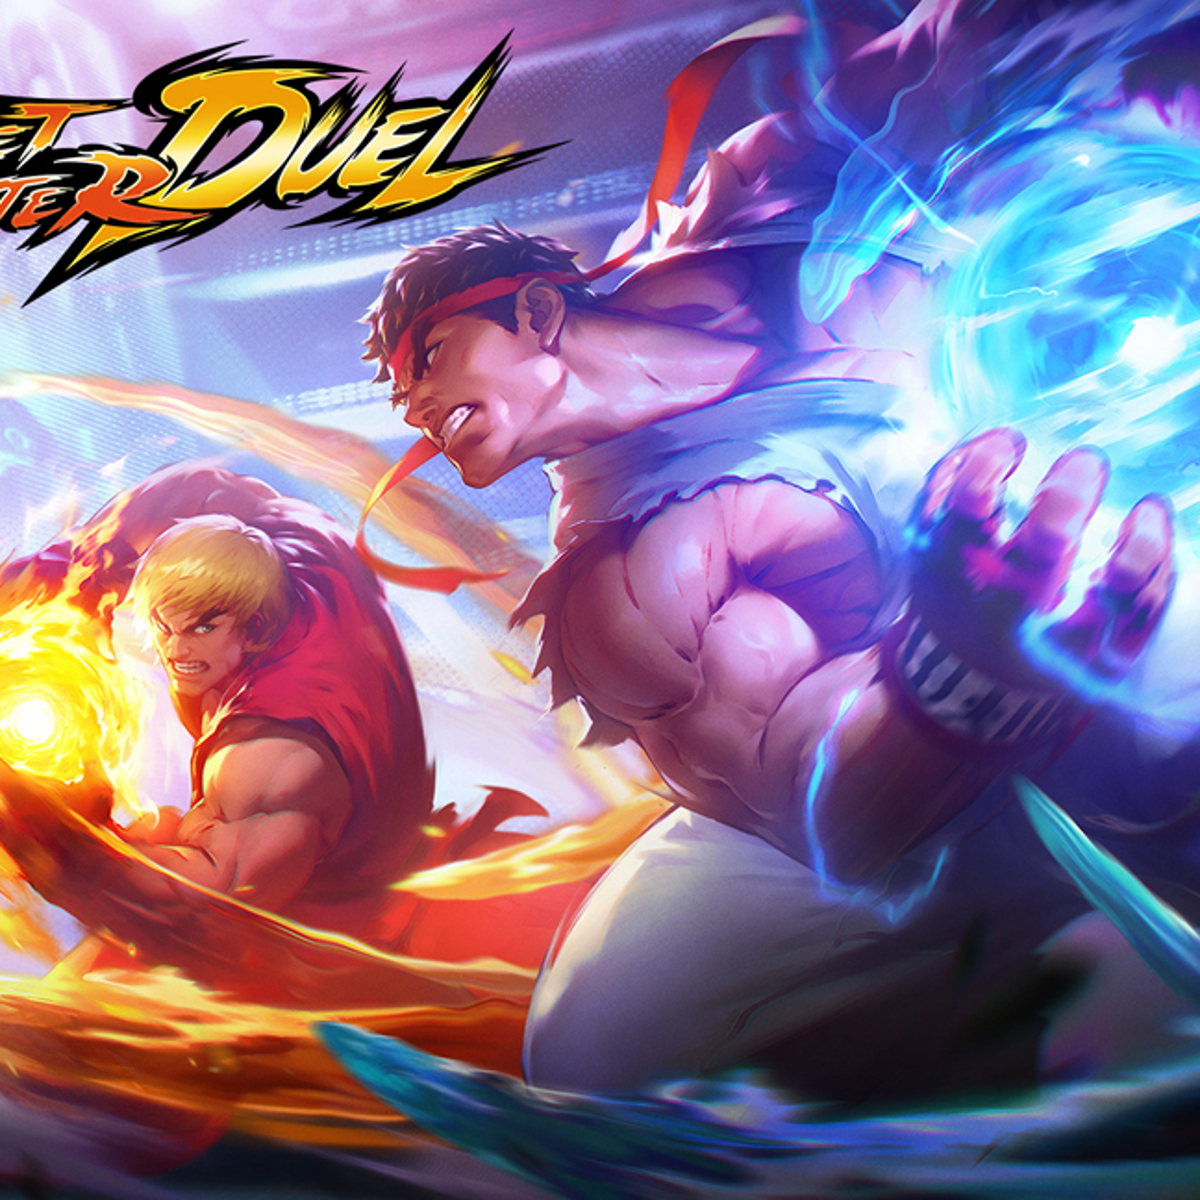 Street Fighter Duel codes for February 2024